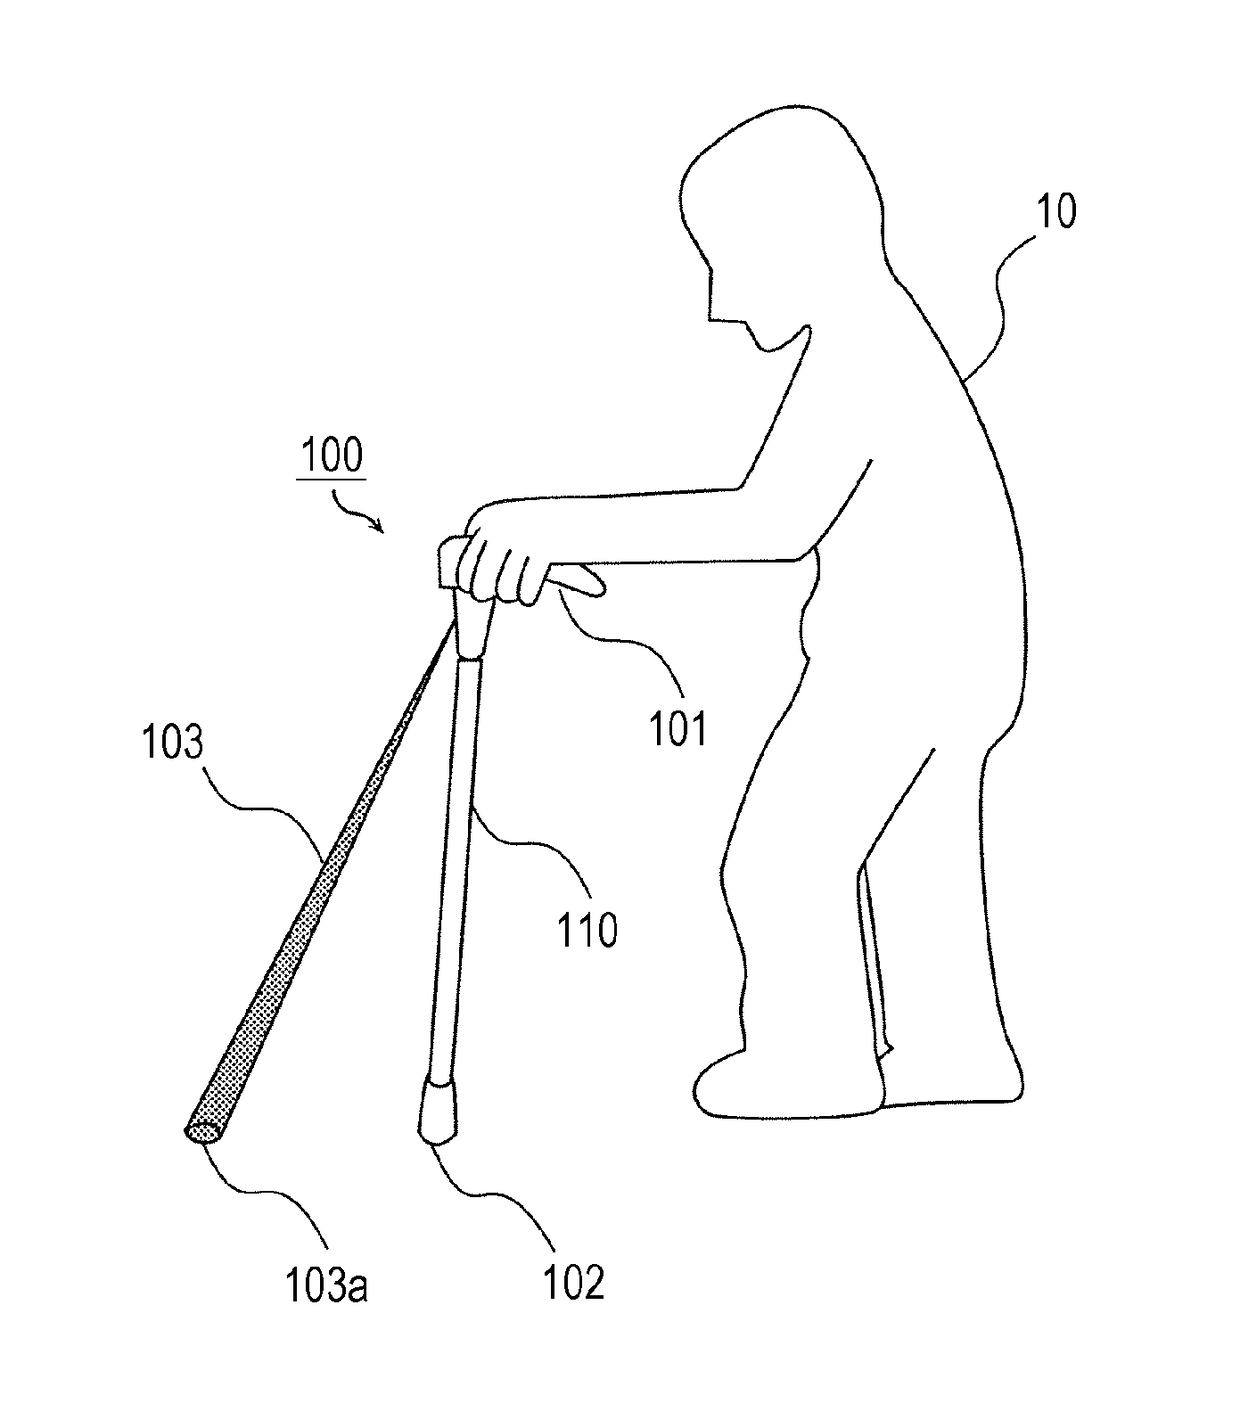 Walking stick and walking assistance device